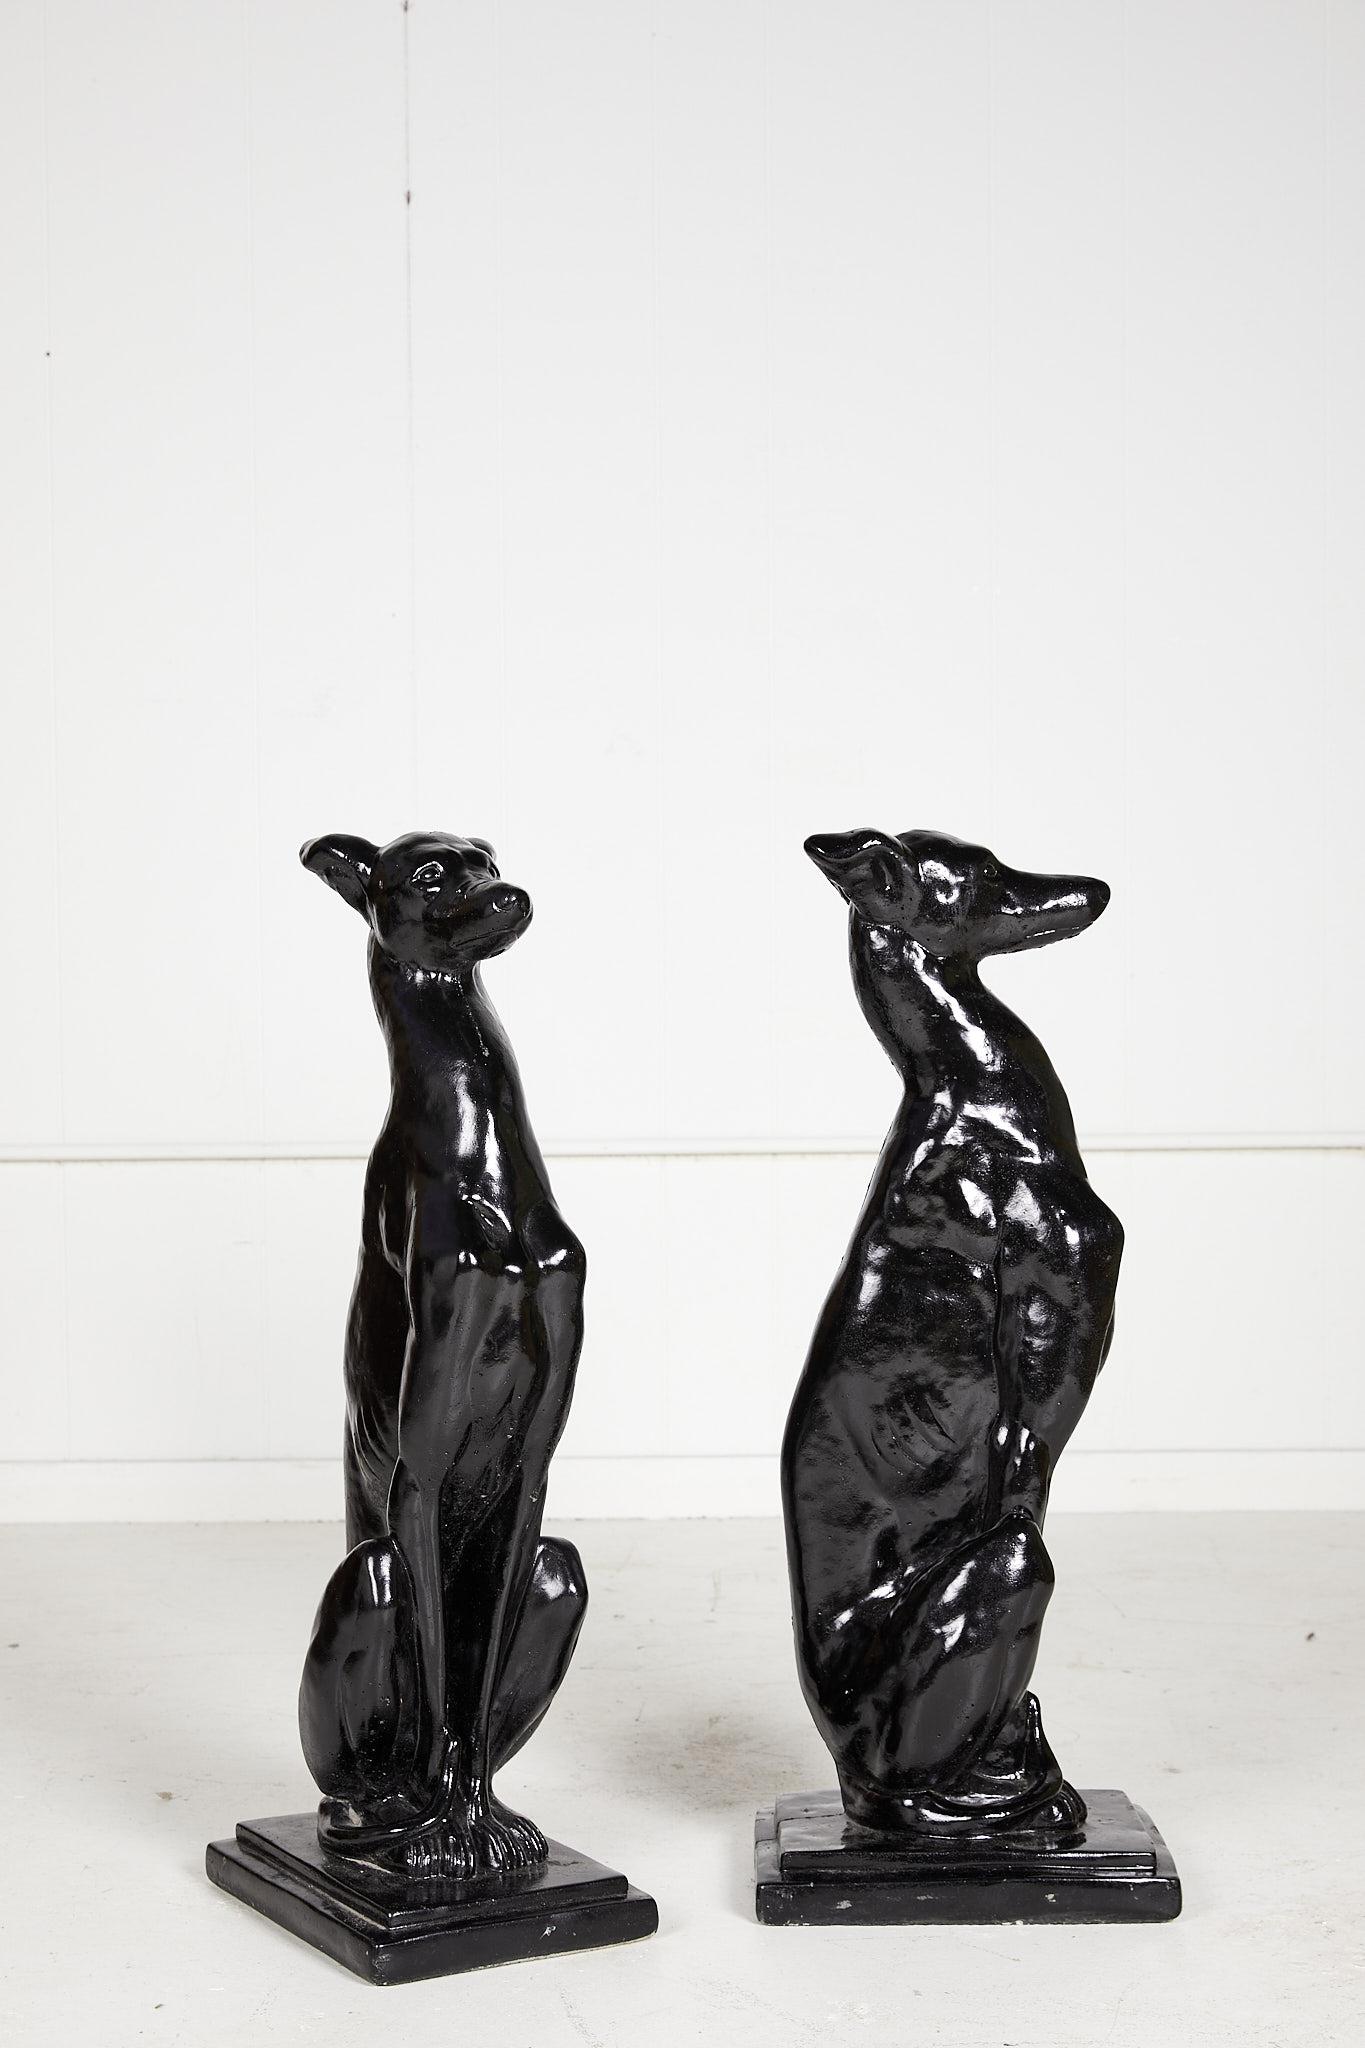 Iconic pair of vintage Art Deco style whippet statues in the seated position, cast and coated in a black gloss finish.